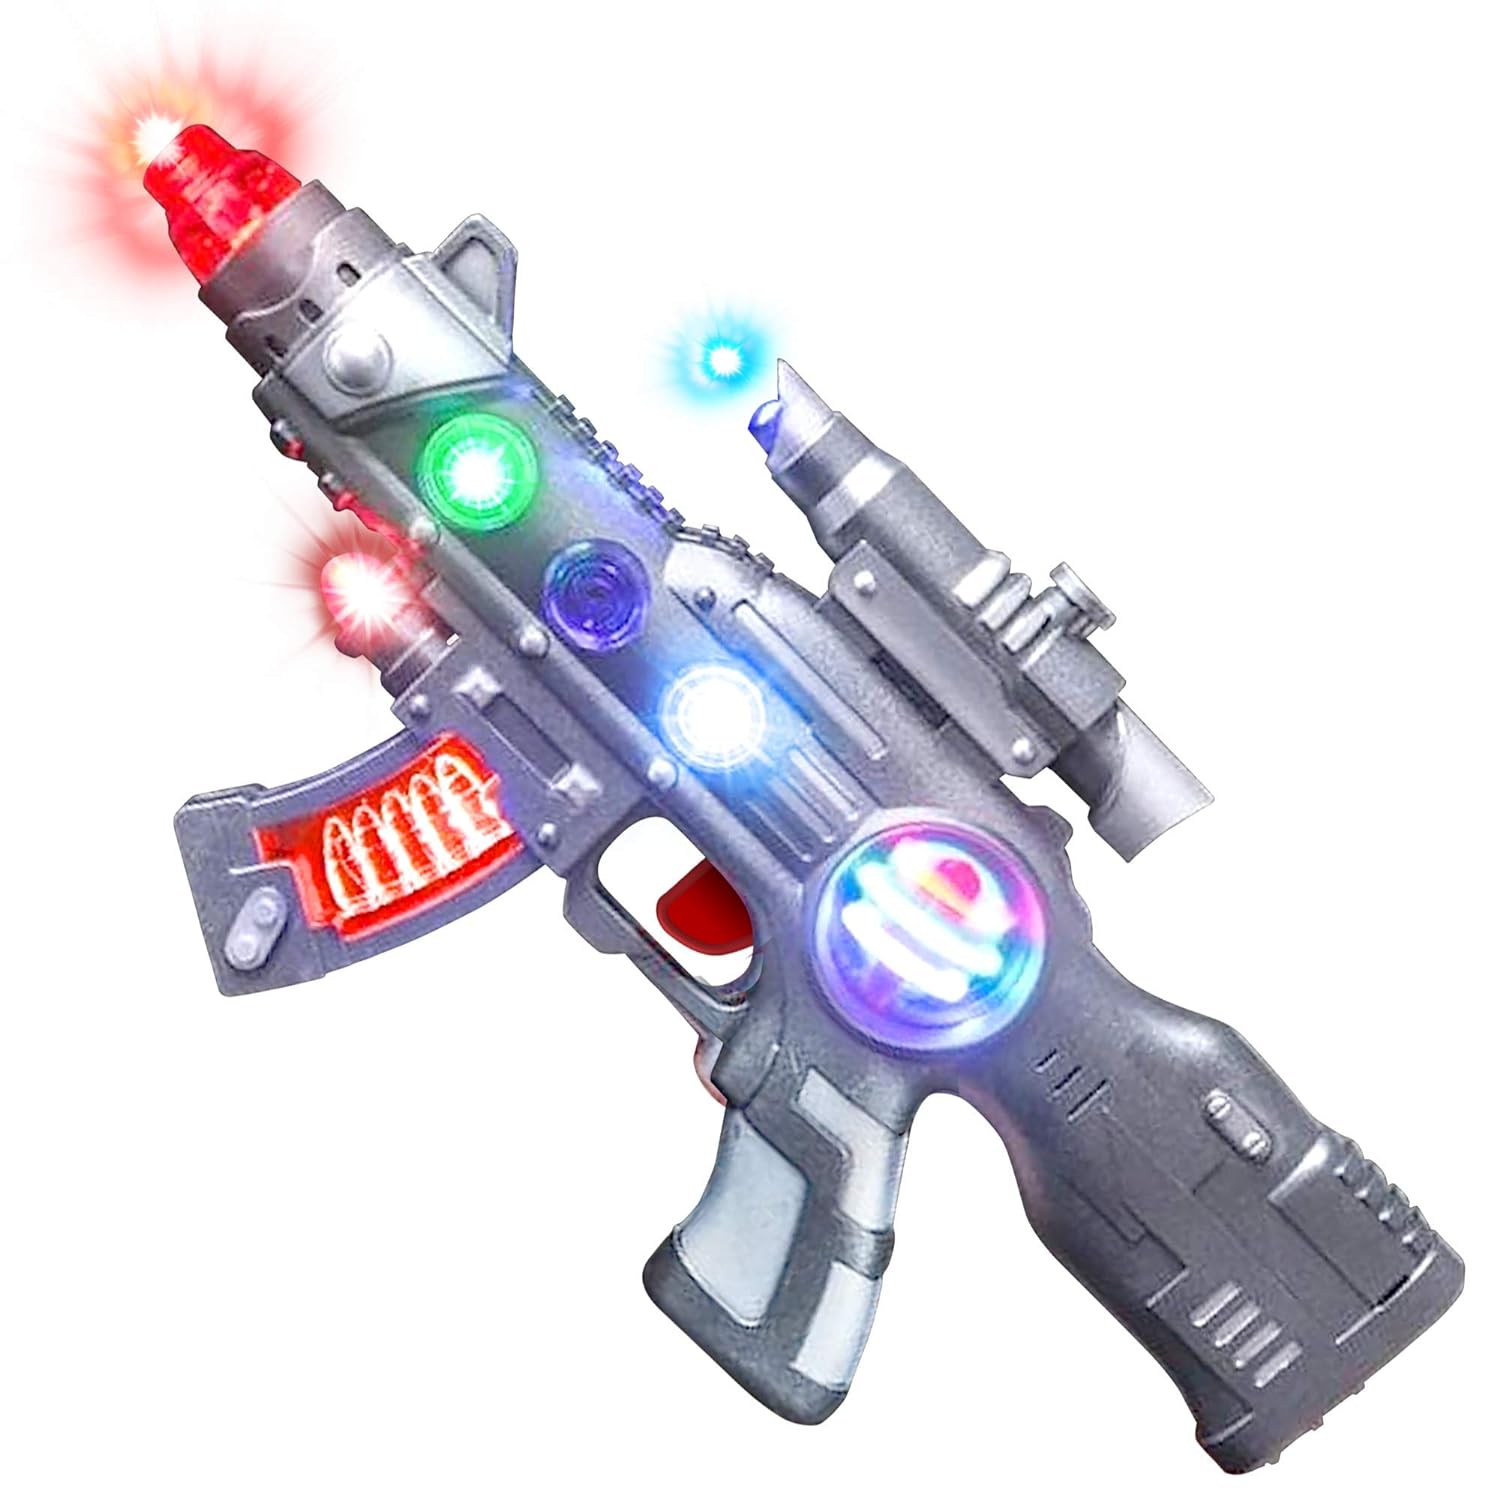 Light Up Spin Ball Blaster Toy Gun, 12.5 Inch Assault Rifle with Thrilling Multicolor LEDs and Sound Effects, Batteries Included